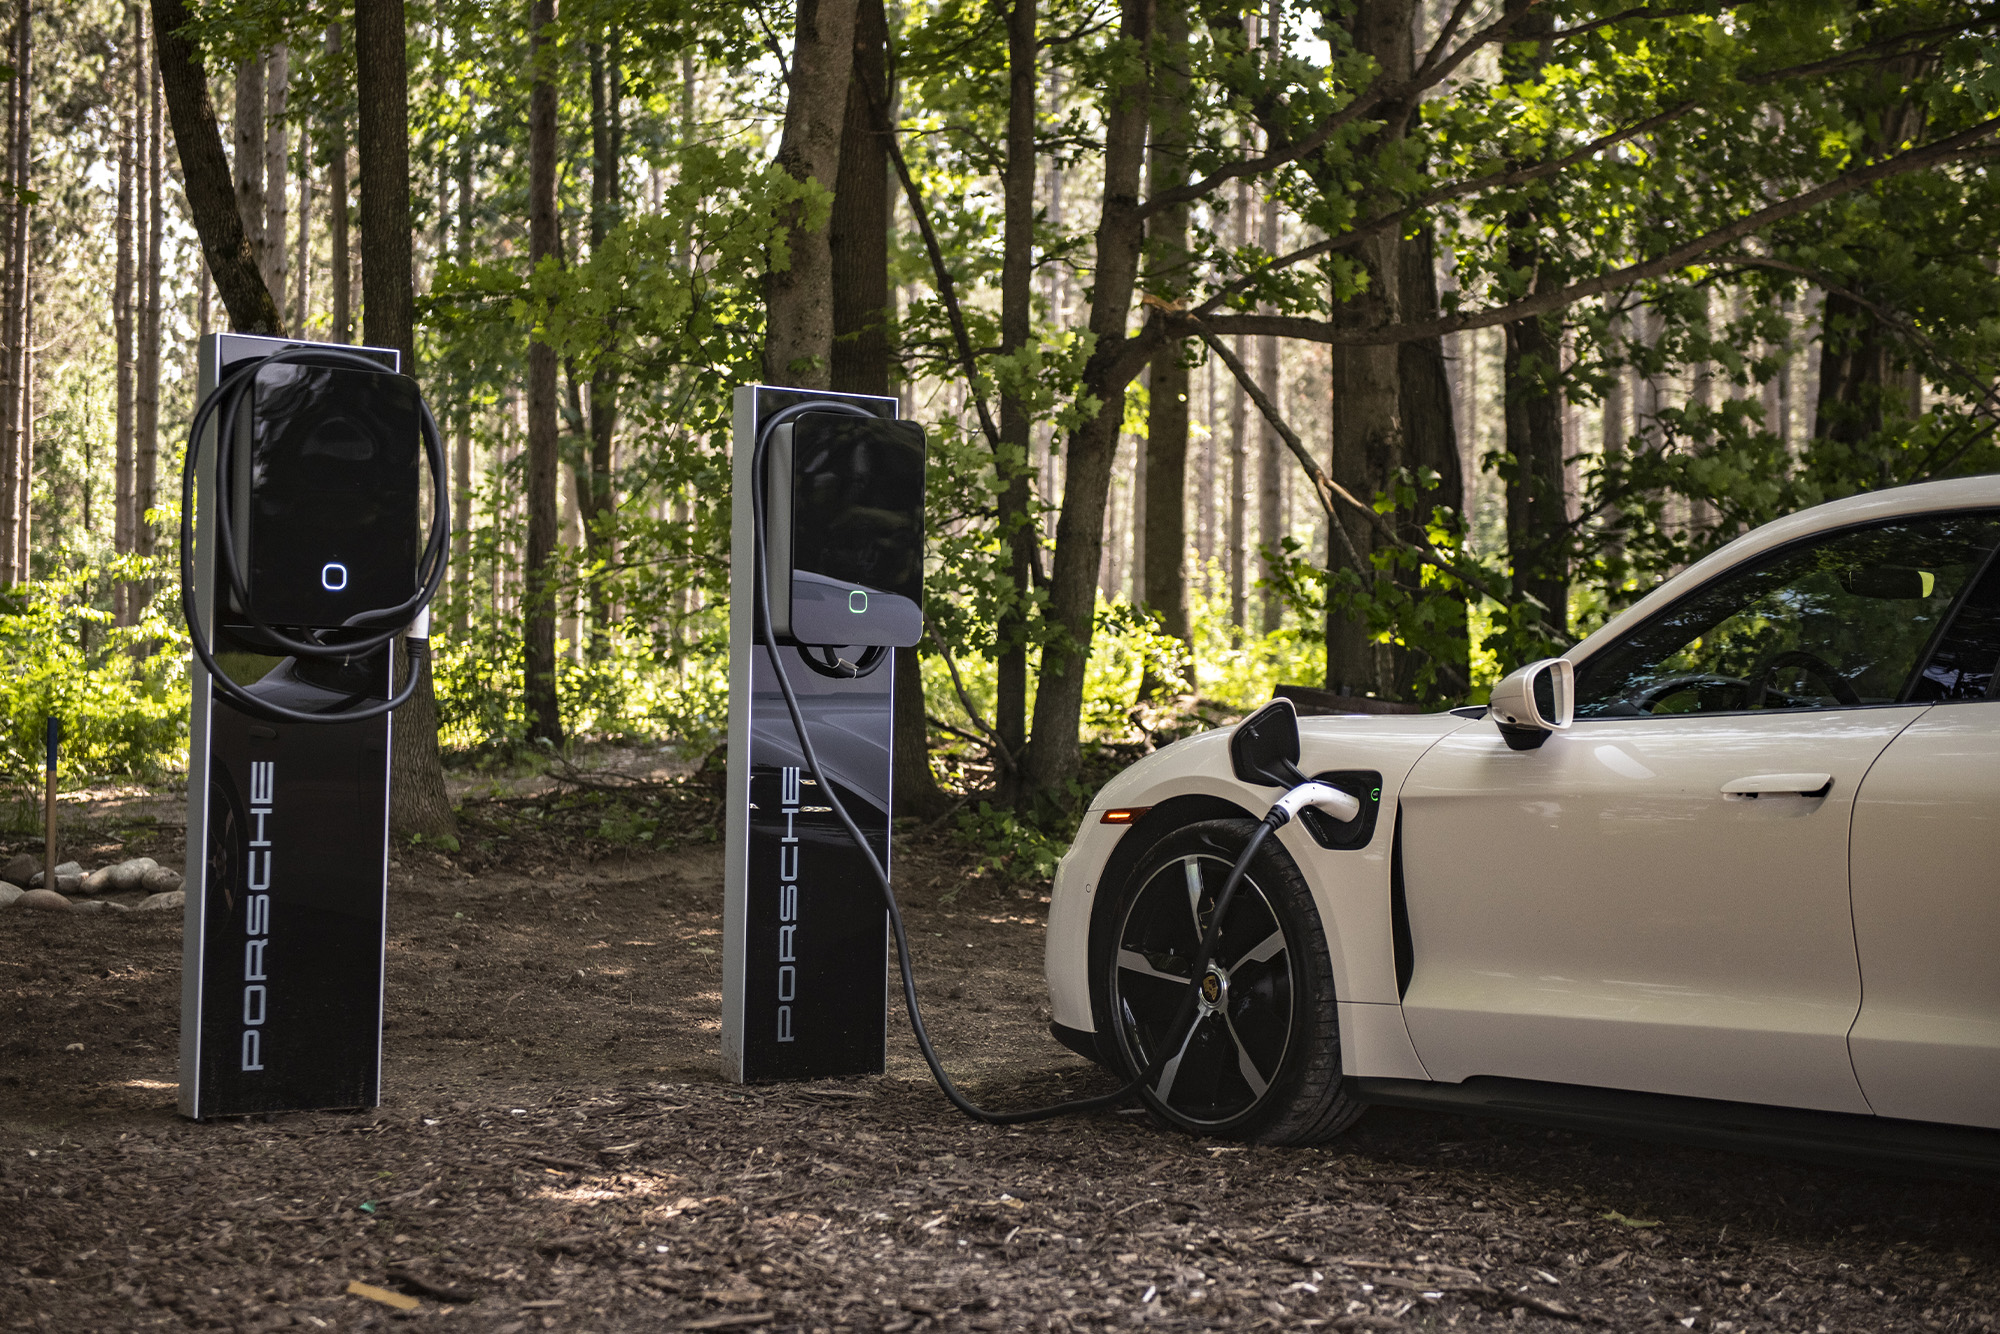 Glen Pro Farm Porsche Charging Station: white Porsche charges on one charging station in the woods on the righthand side, the other charging station is open